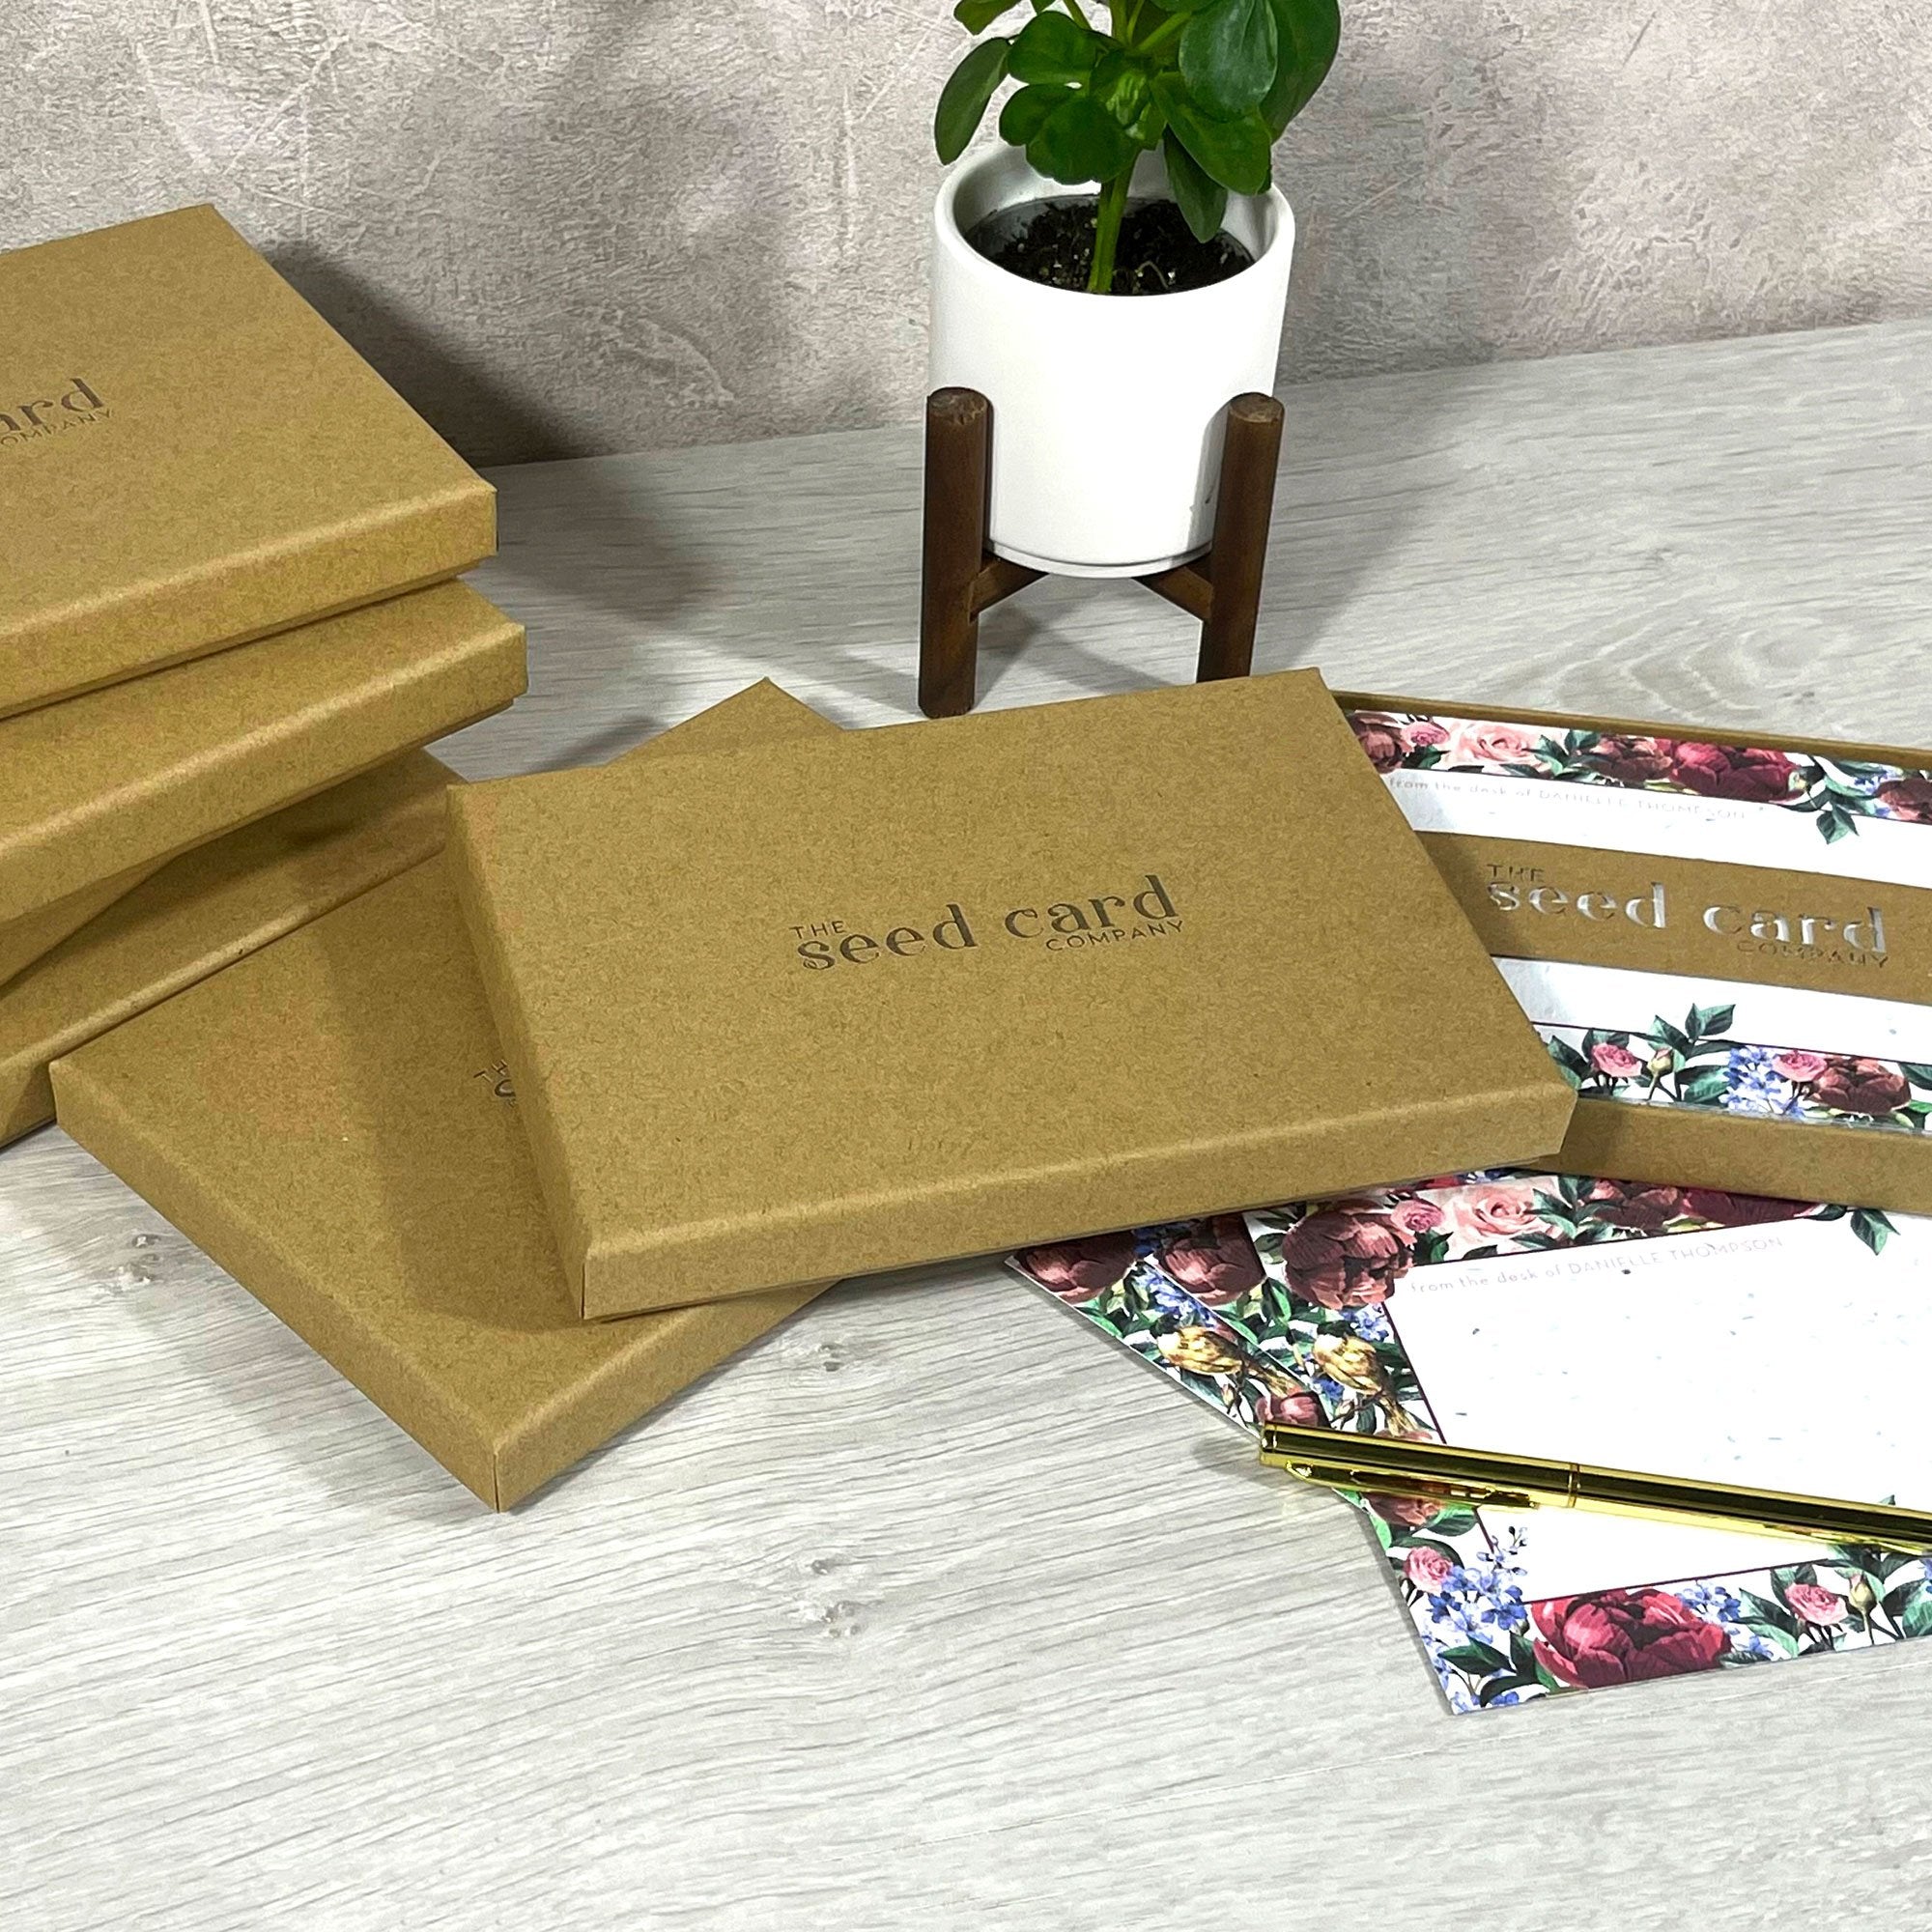 Shop online Pink Flecks - 100% biodegradable seed-embedded cards Shop -The Seed Card Company